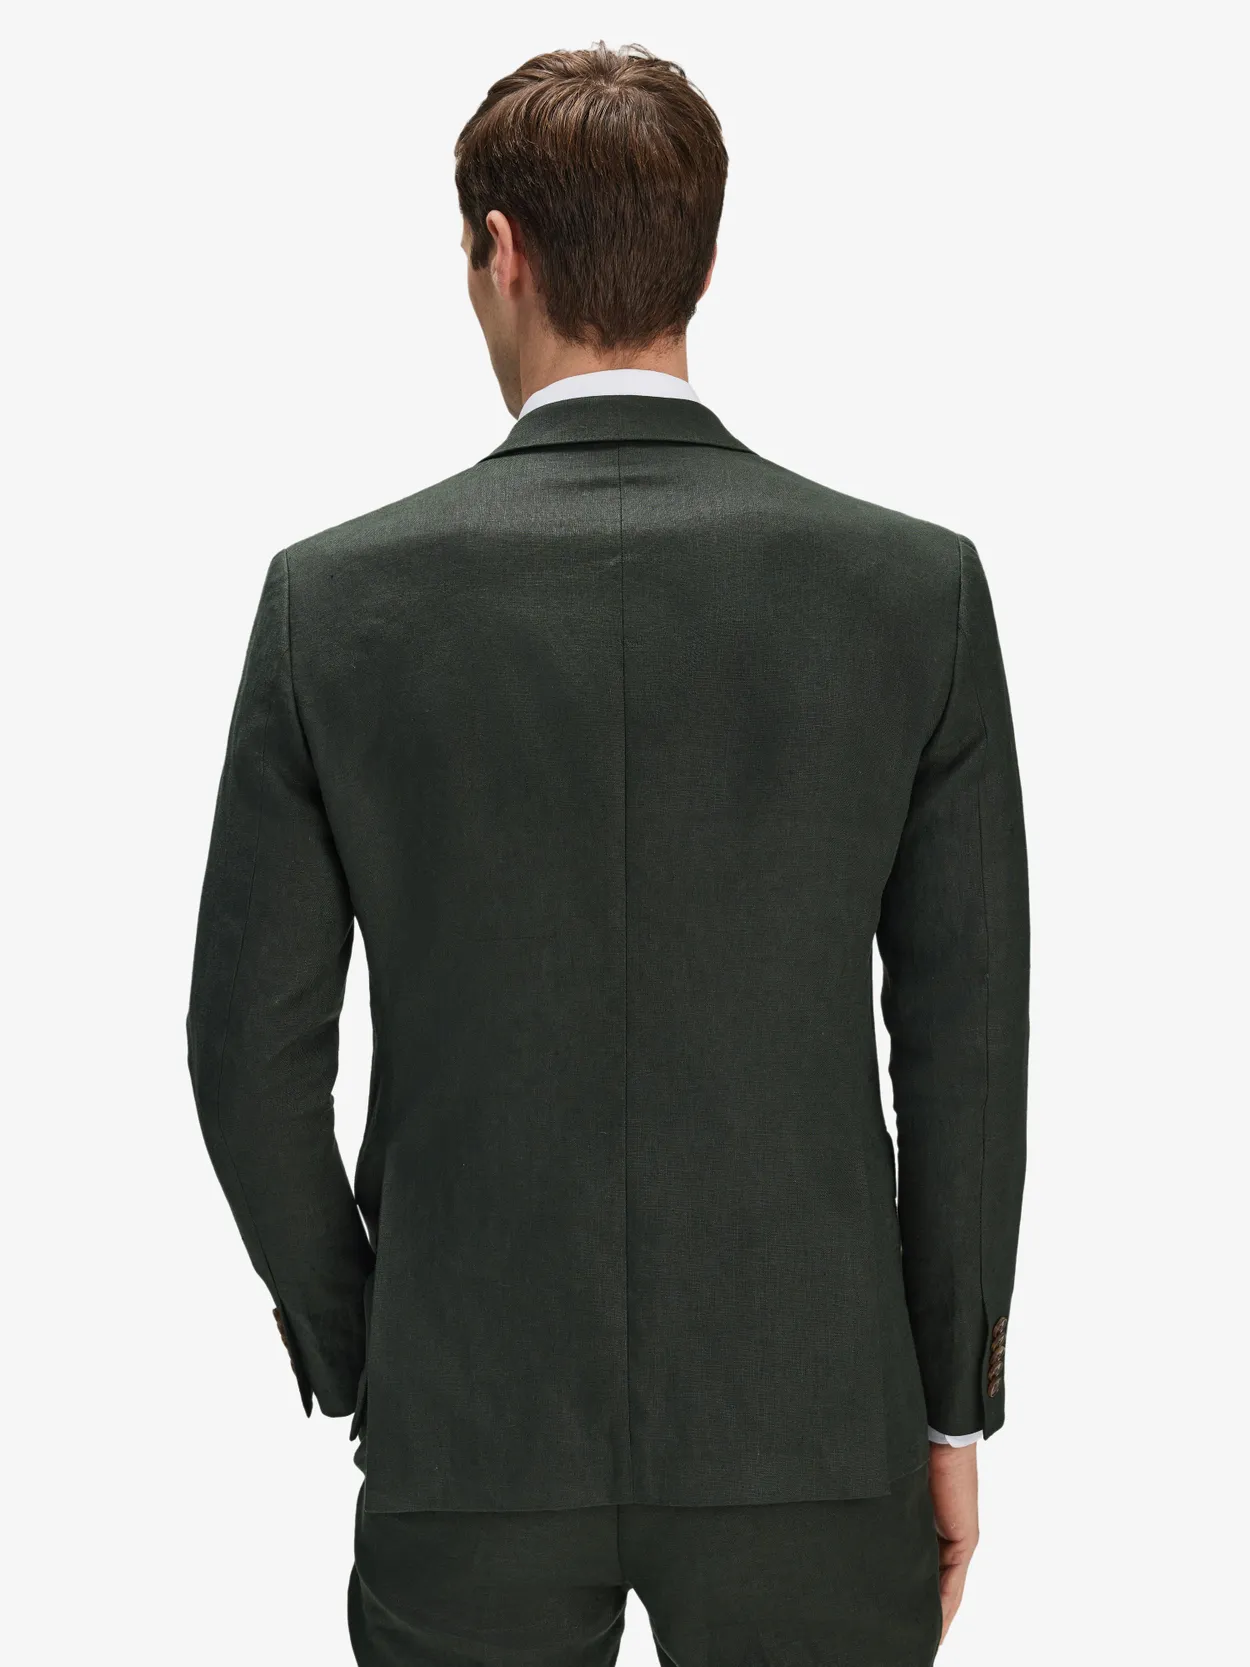 Image number 3 for product Green Linen Suit & Shirt